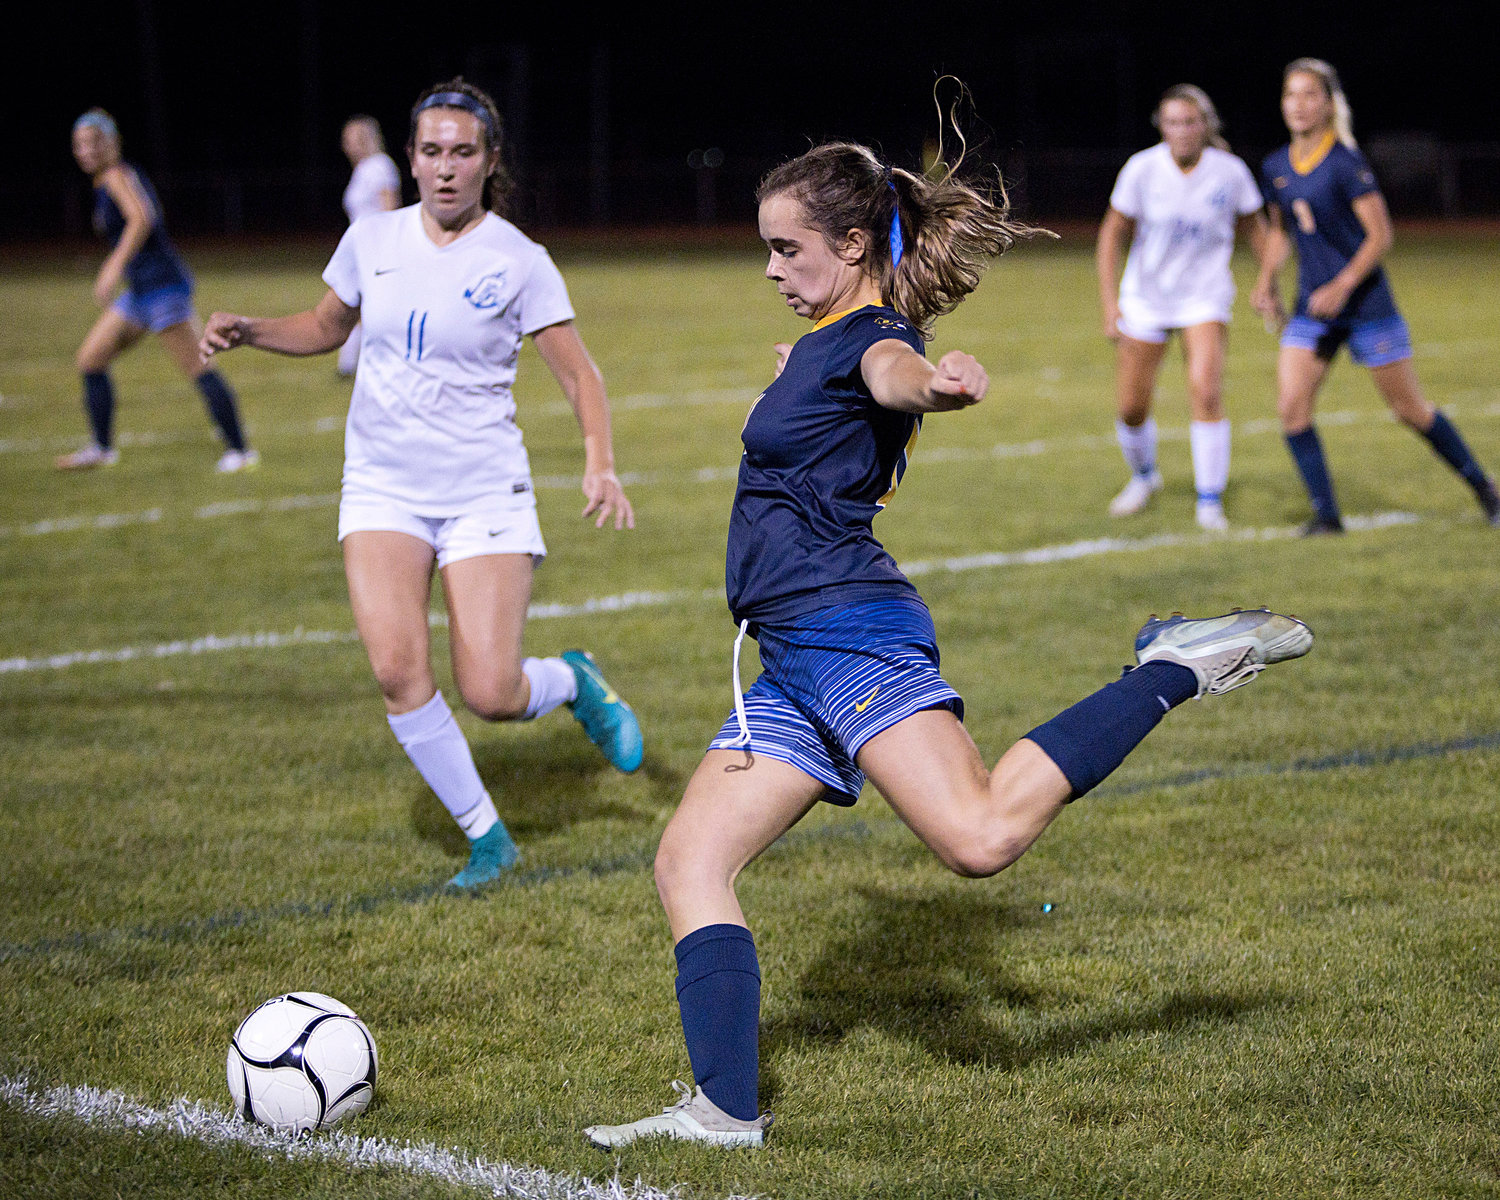 Ella Abadi fires a pass upfield while competing against Cumberland, Friday night.